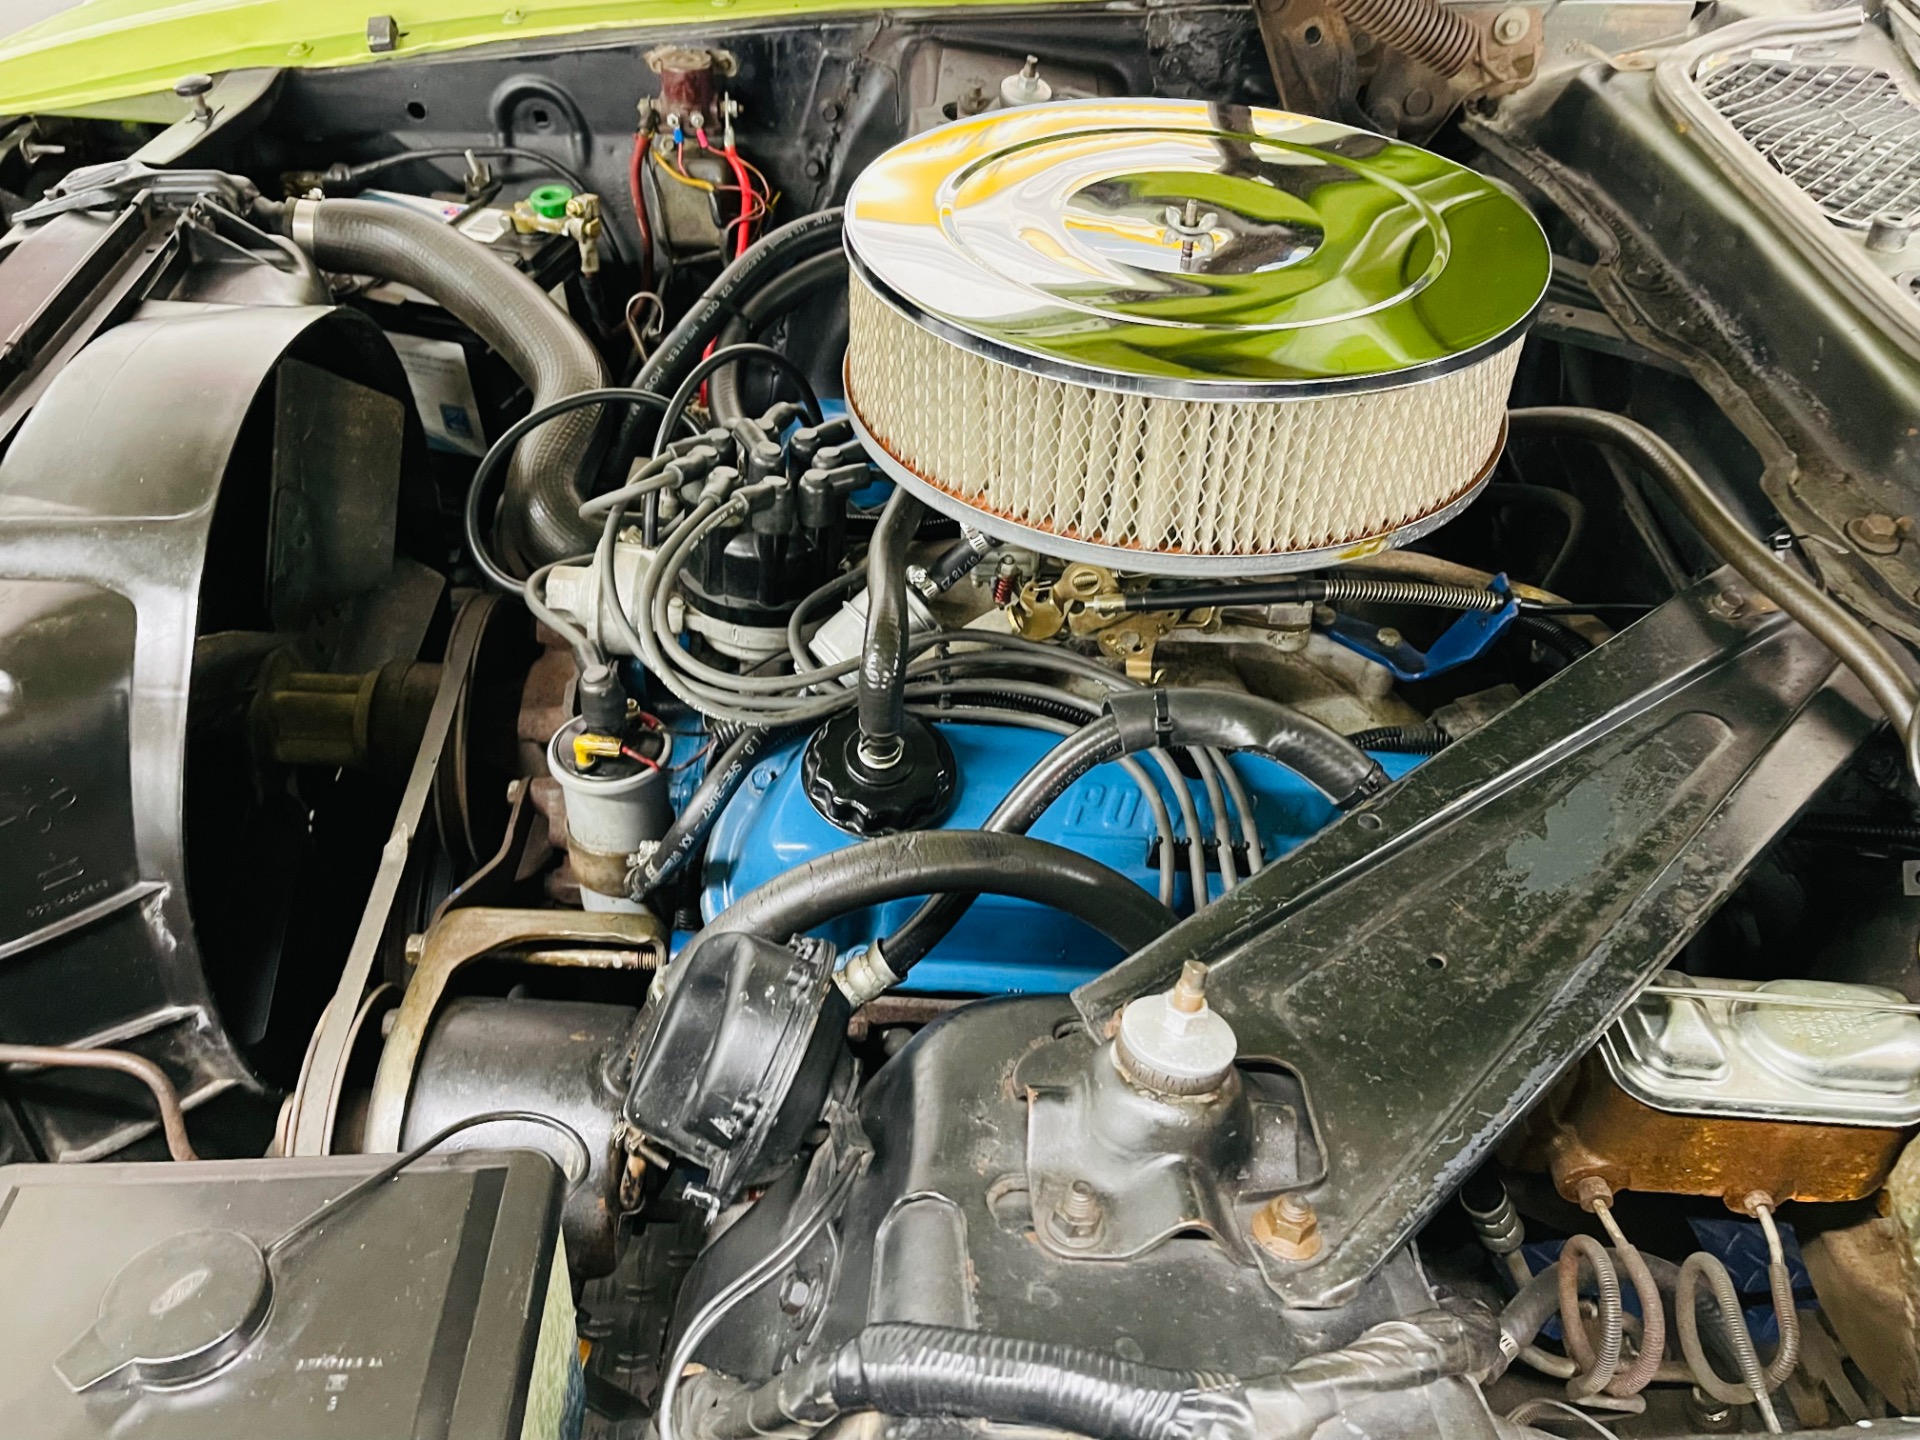 Used 1972 Ford Mustang - GRANDE COUPE - 302 V8 ENGINE - | Mundelein, IL